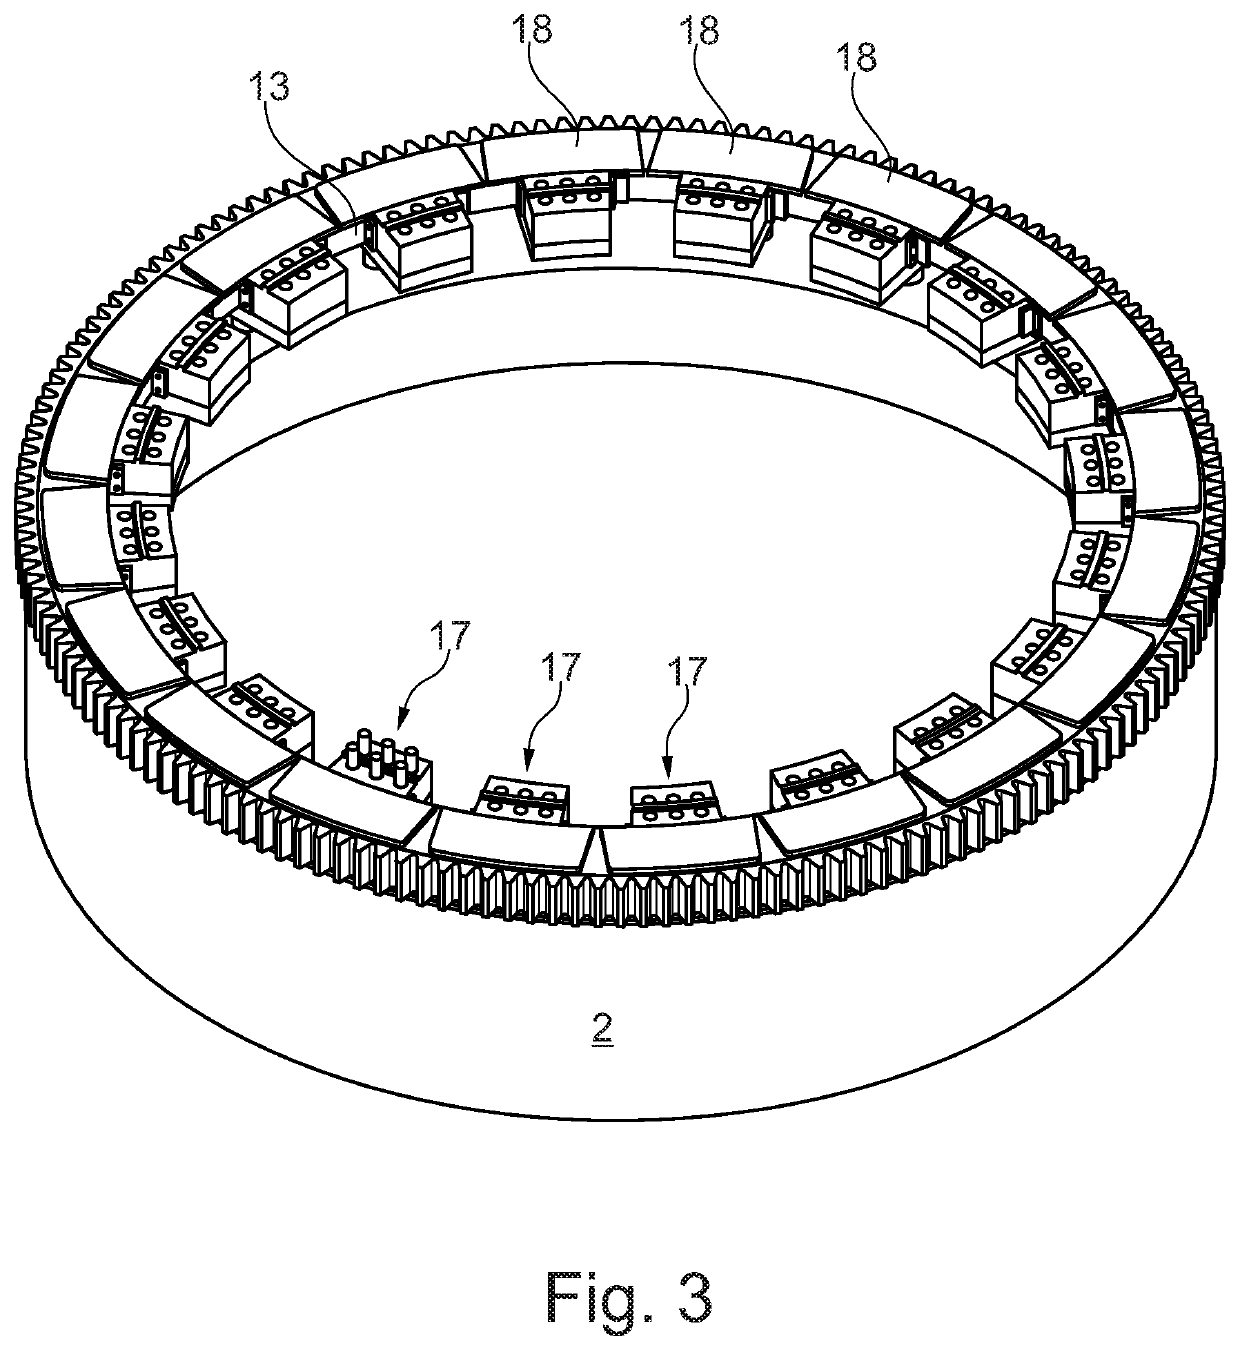 Wind turbine comprising a yaw bearing system